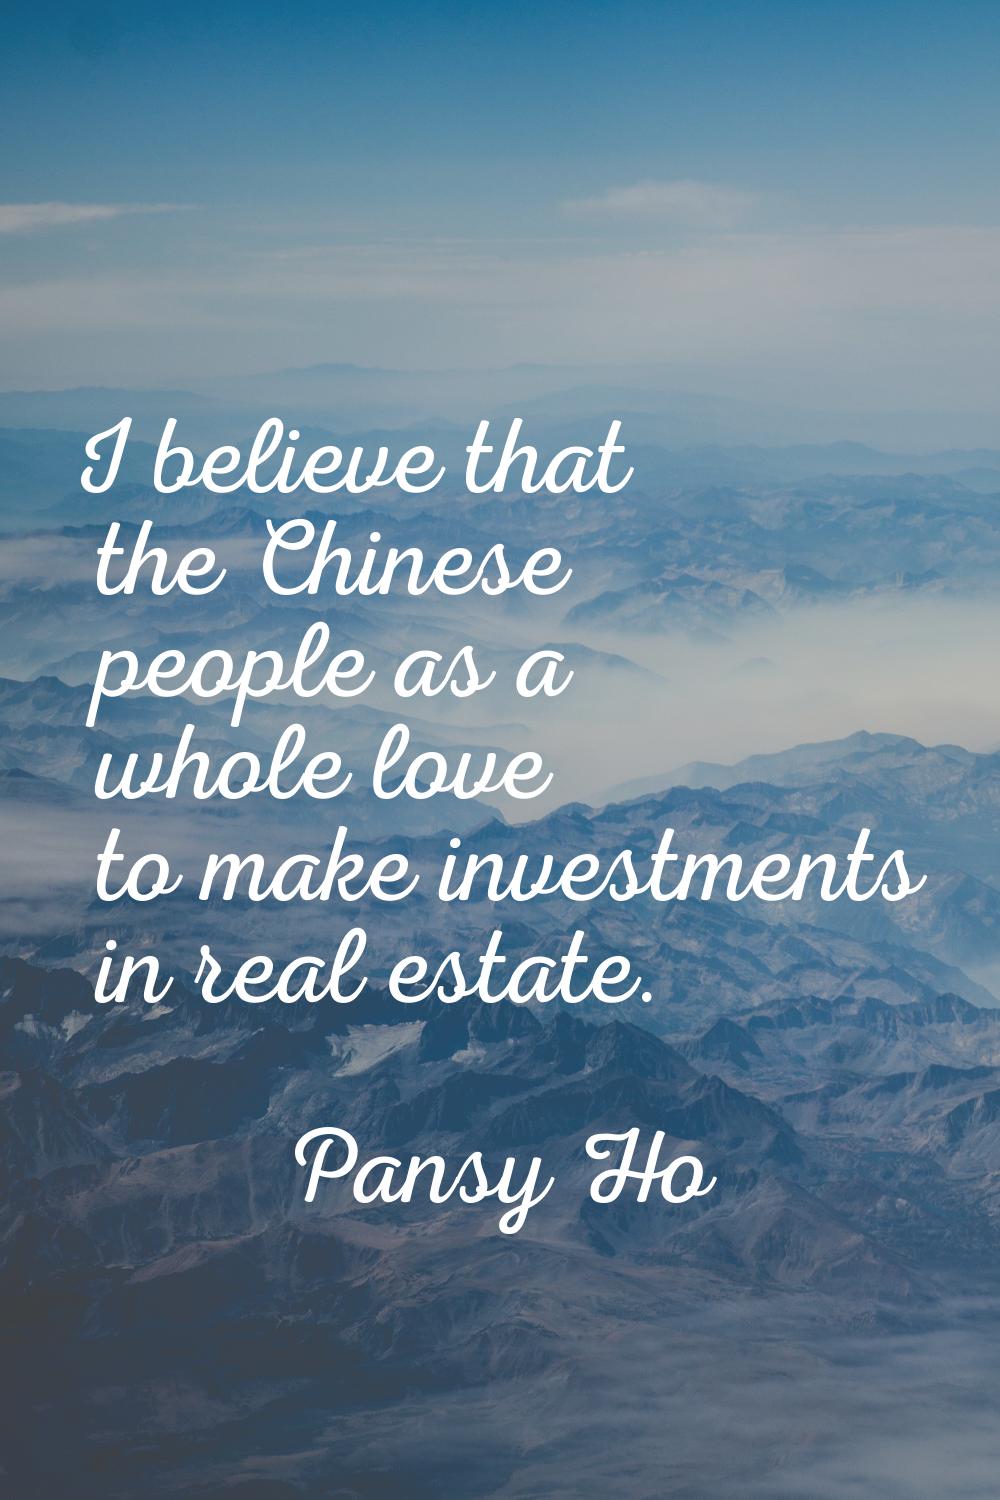 I believe that the Chinese people as a whole love to make investments in real estate.